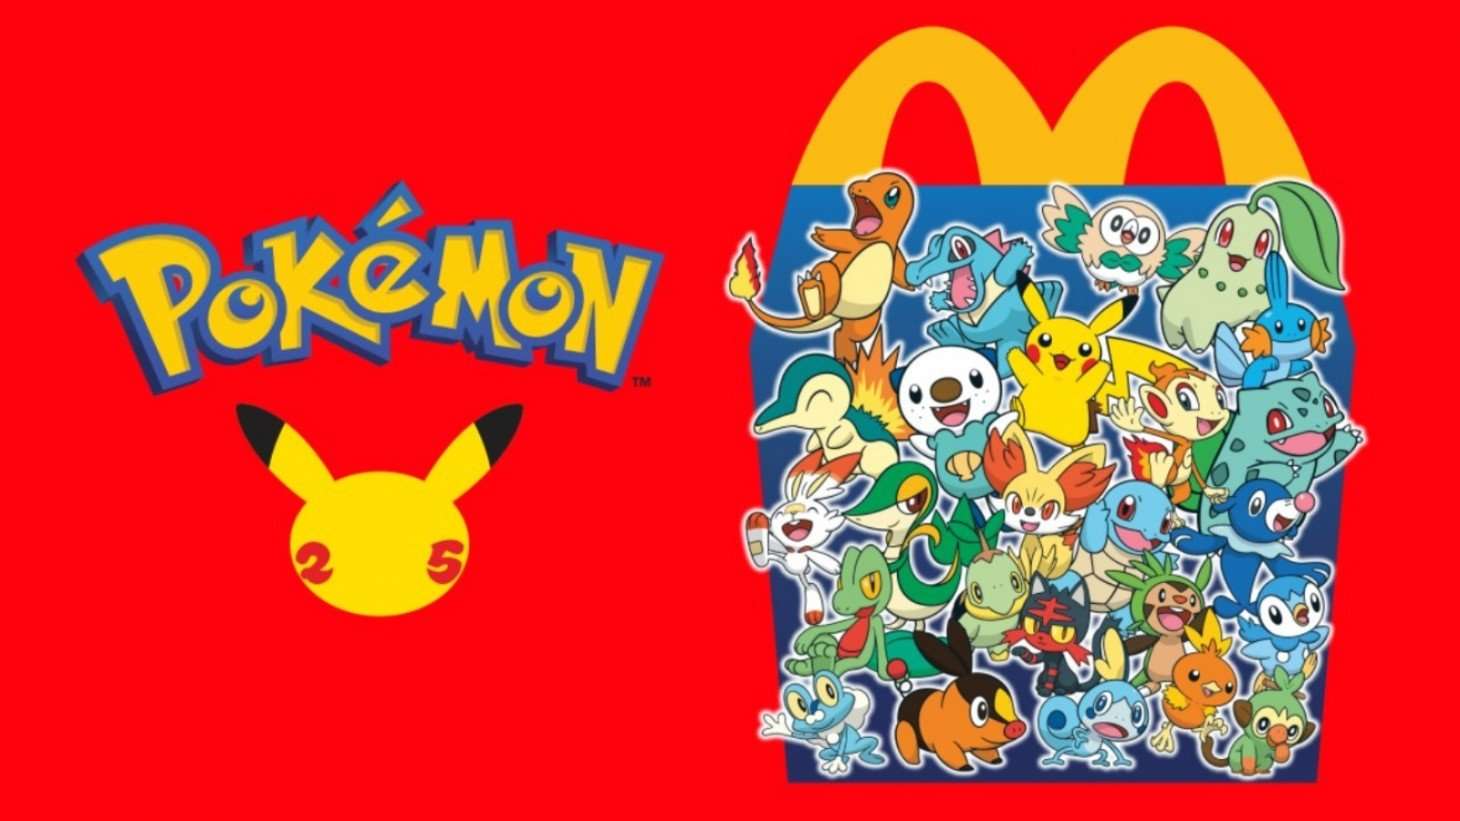 McDonalds Pokémon Happy Meal Cards Are Selling Out Thanks ...